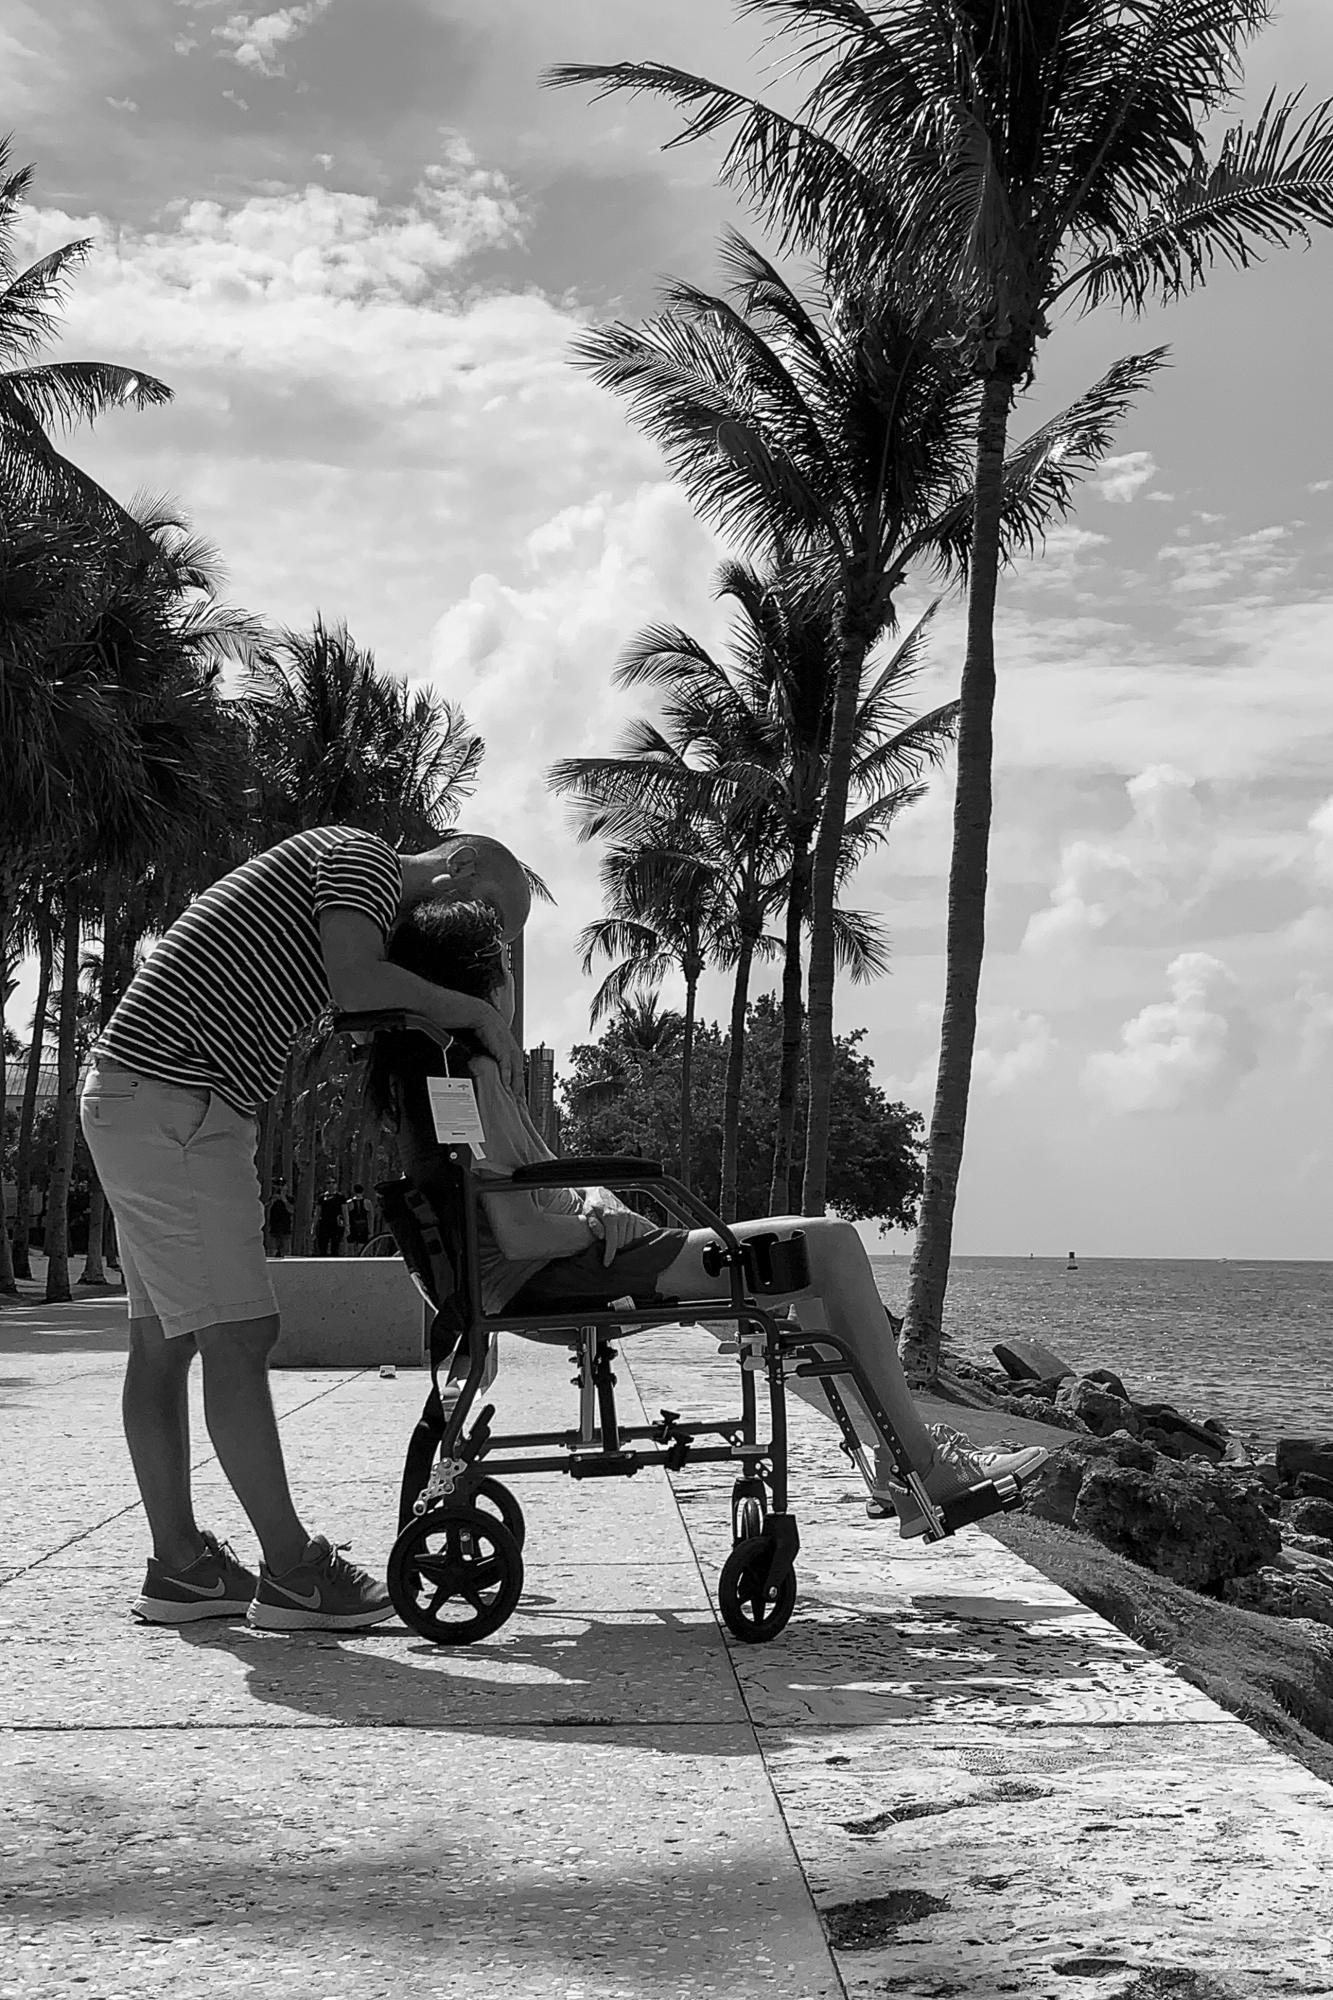 In her last months, the use of the wheelchair was the resource to keep her moving and to be able to enjoy her favorite place, the beach. This whole...